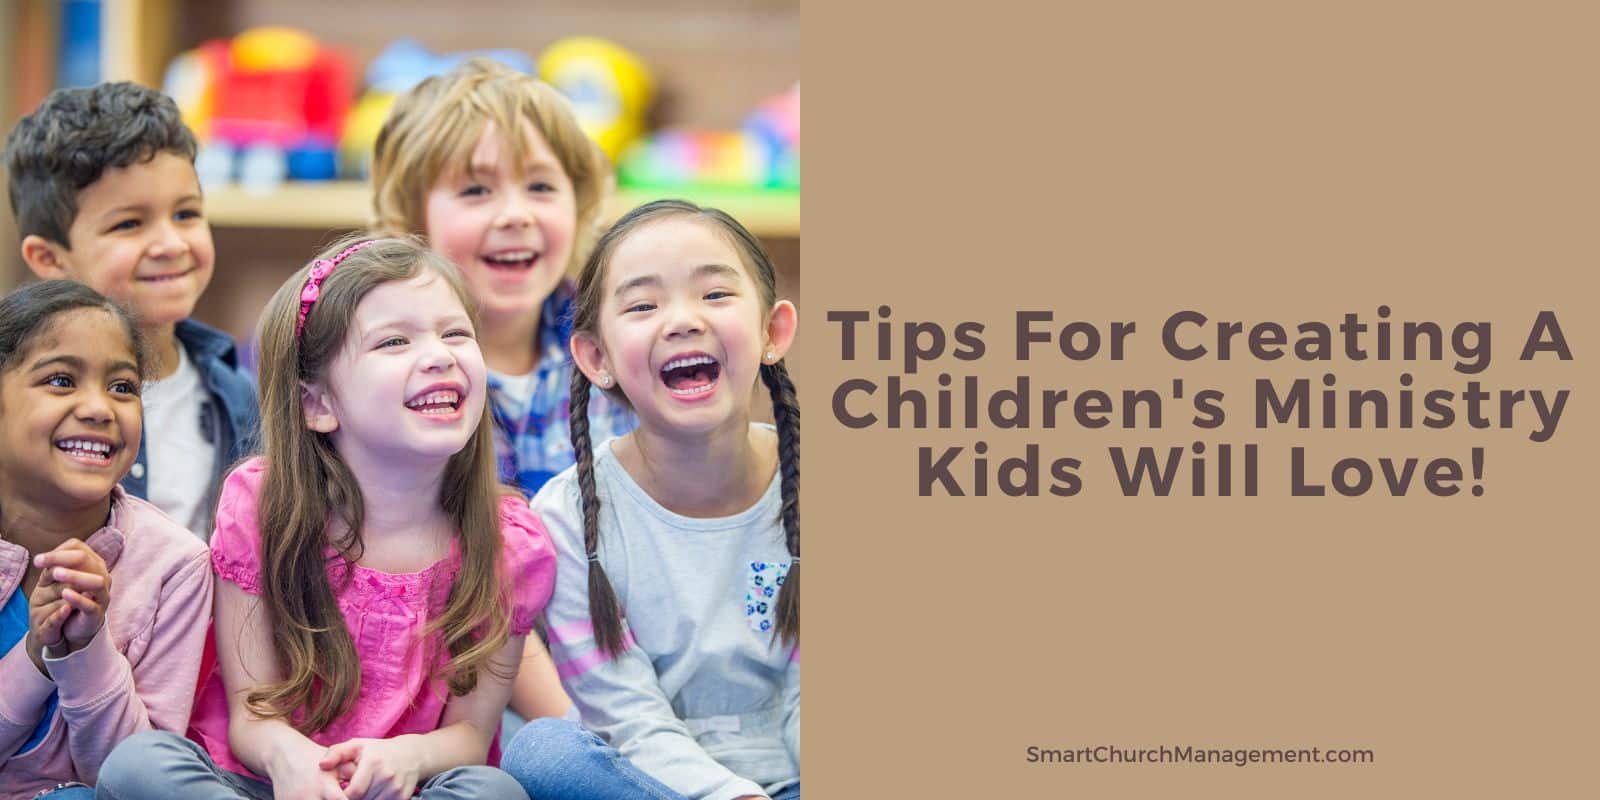 How to create a children's ministry that kids love